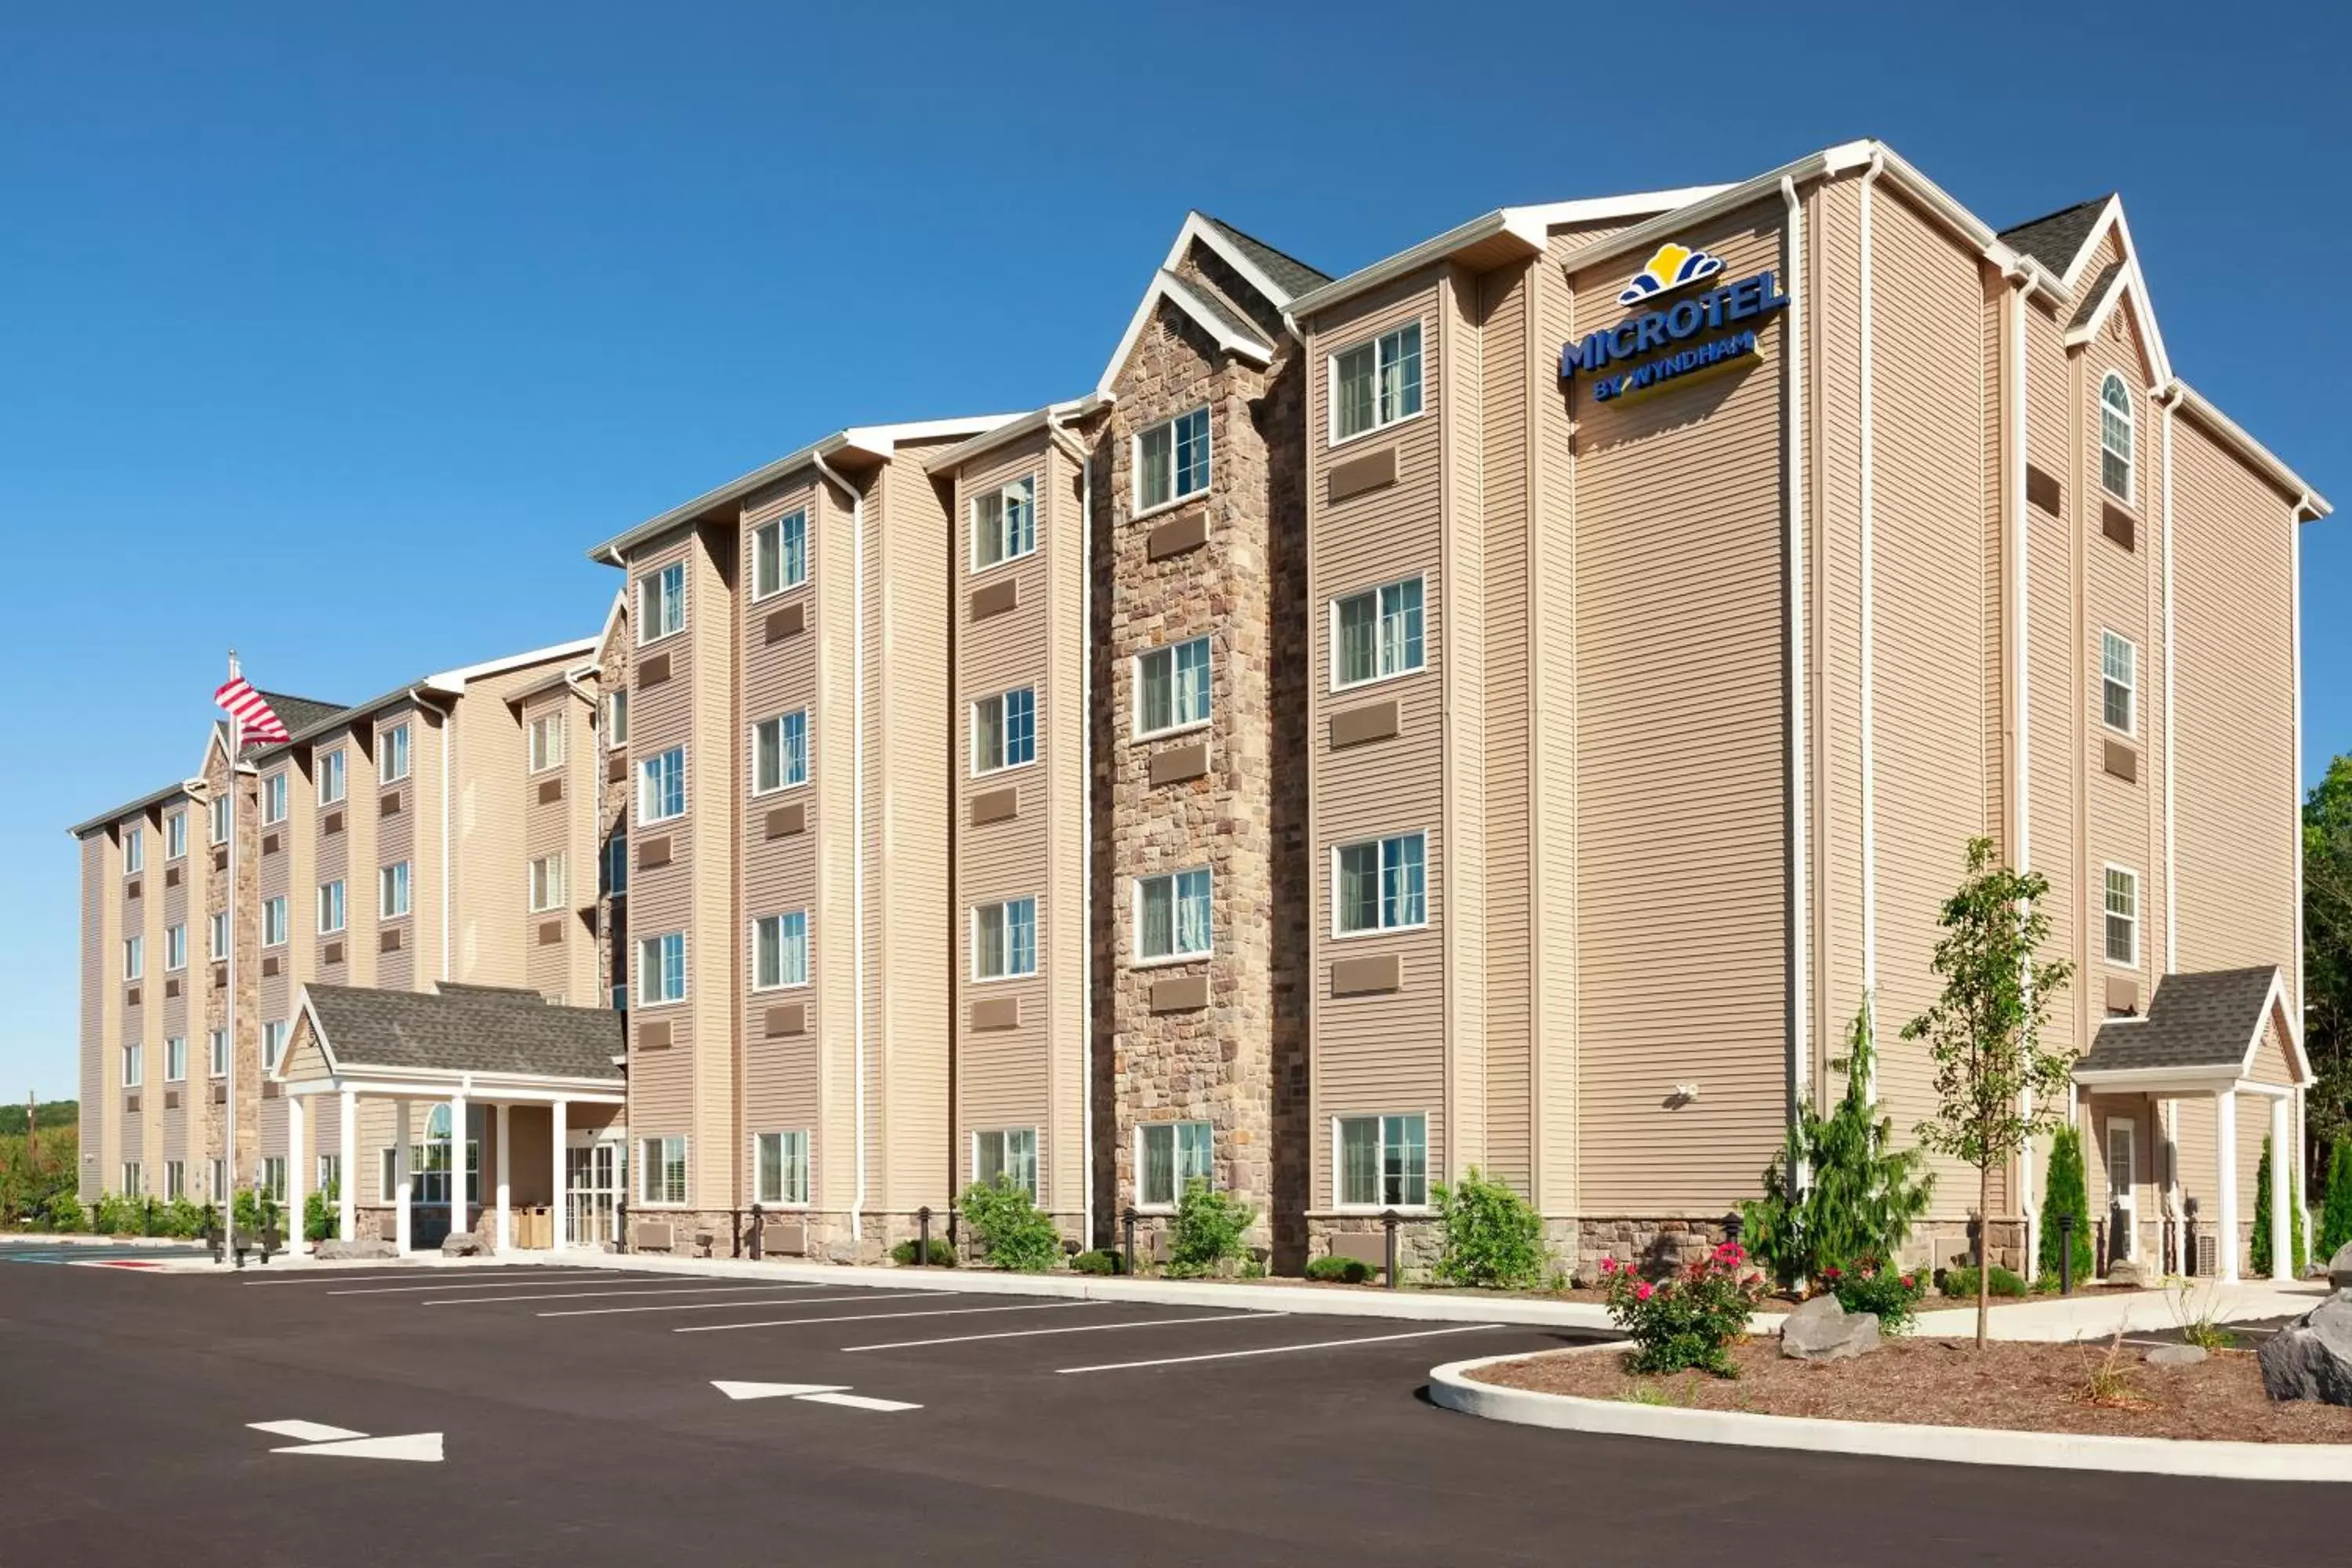 Facade/entrance, Property Building in Microtel Inn & Suites by Wyndham Wilkes Barre